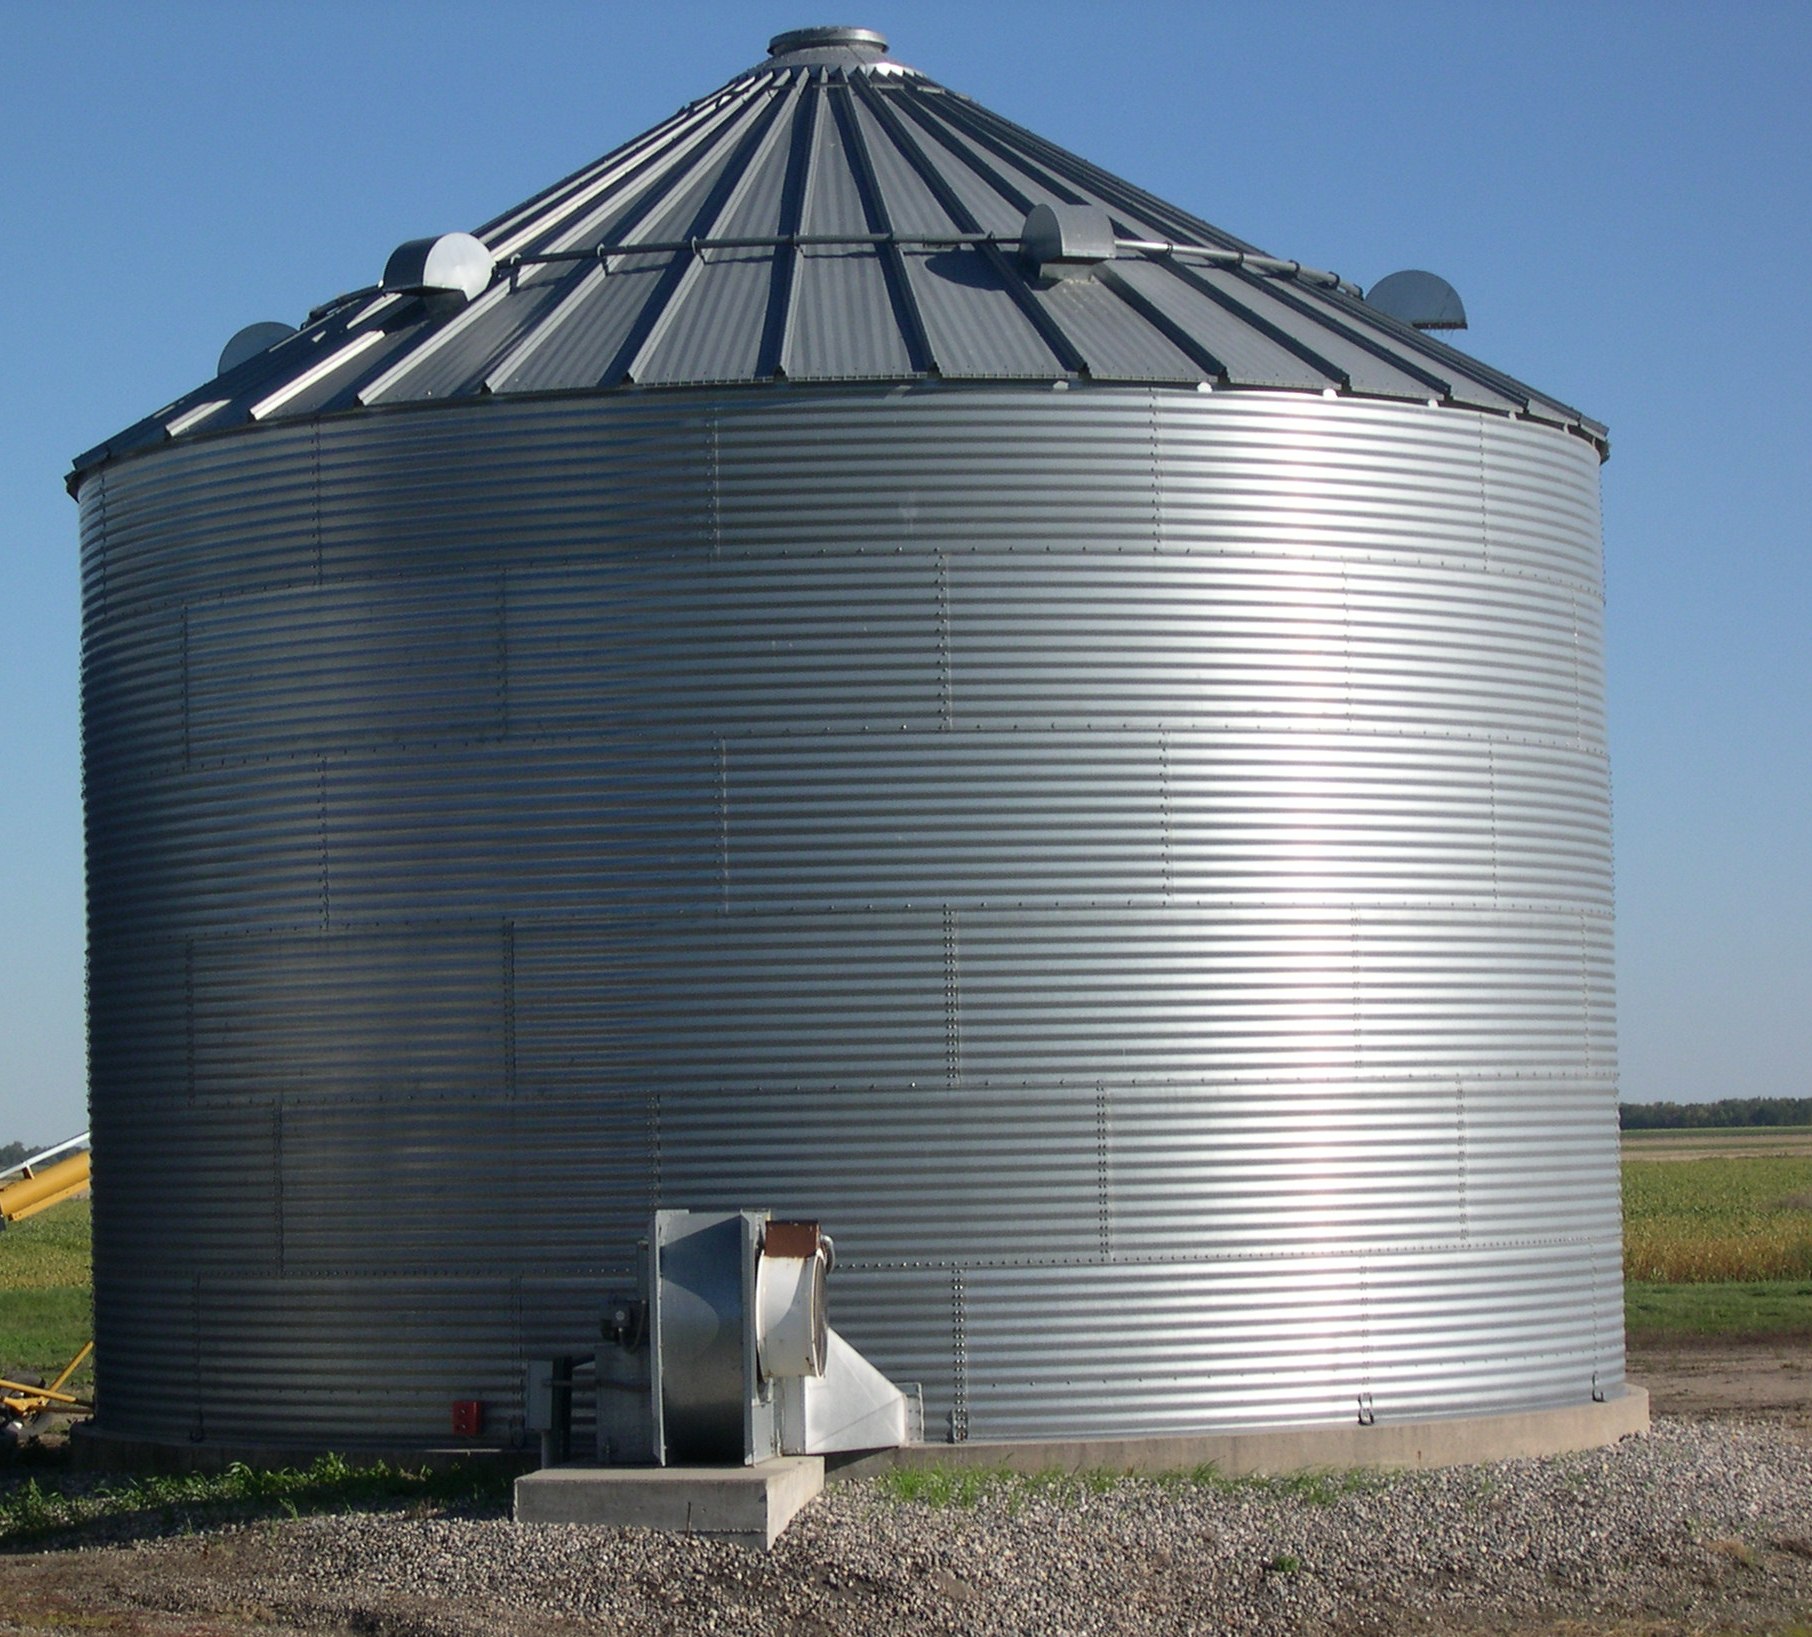 The goal for summer grain storage should be to keep the grain as cool as possible to extend its storage life and limit insect activity. (NDSU photo)